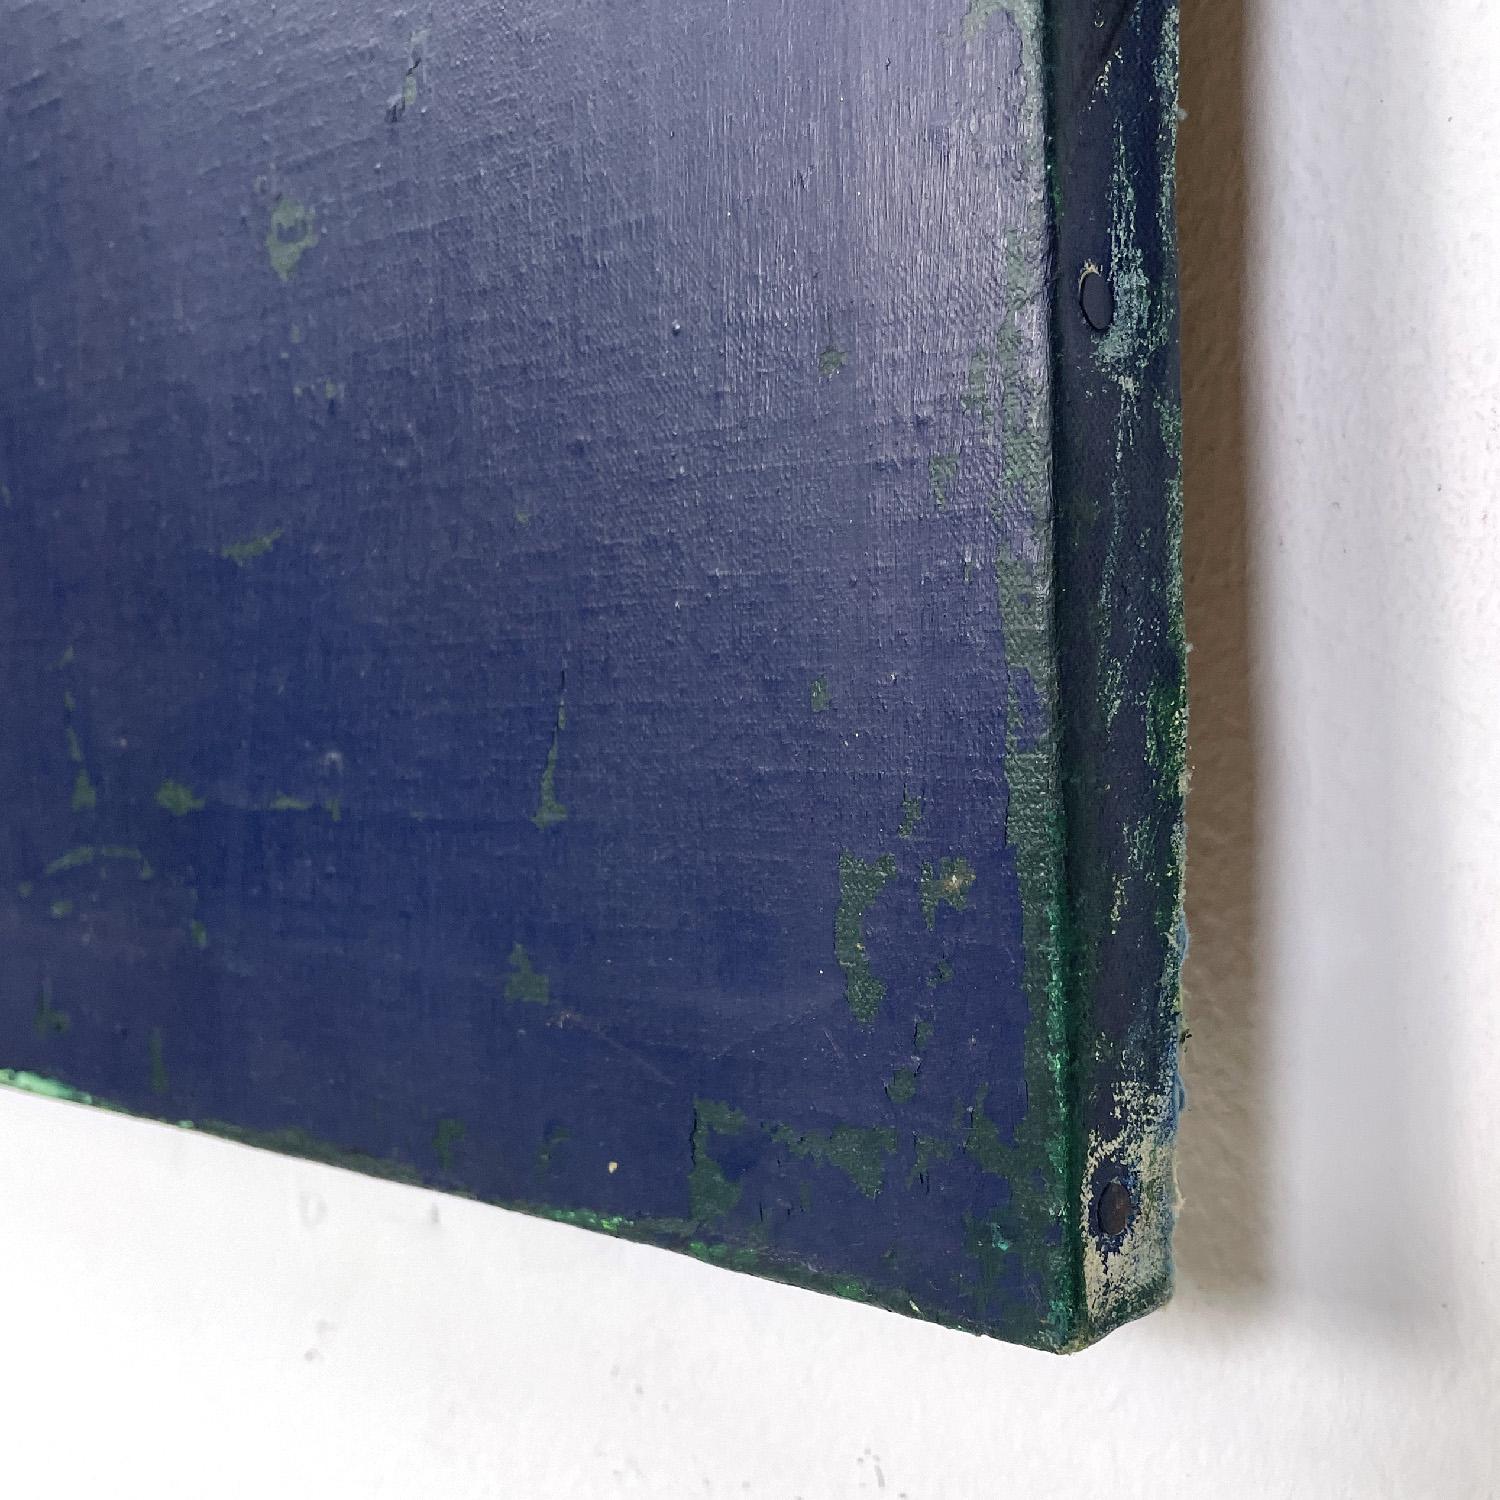 Italian modern blue and green acrylic painting by Domenico Messana, 1972 For Sale 5